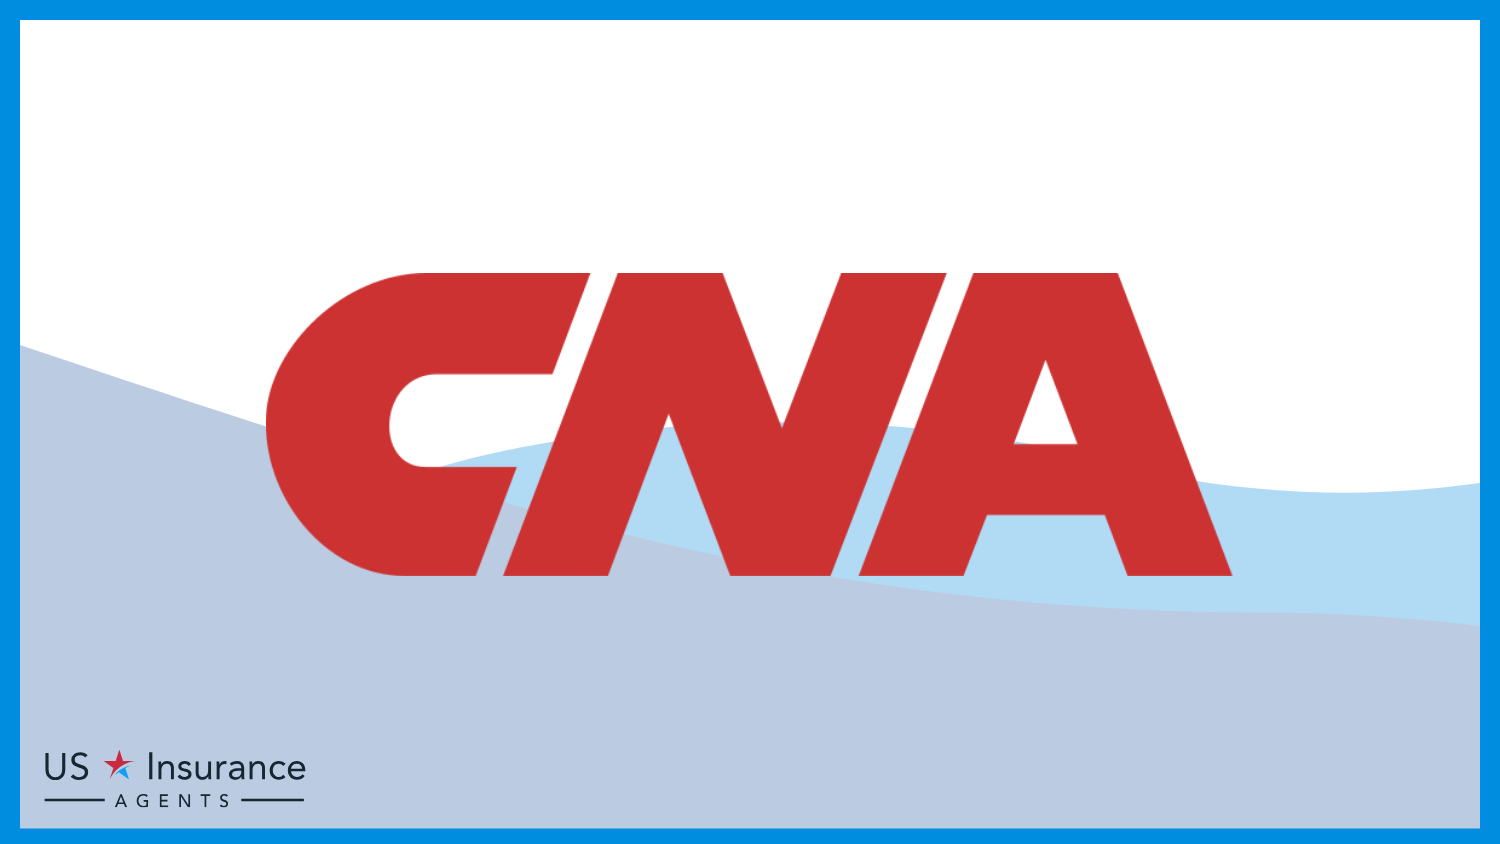 CNA: Best Business Insurance for Media Entertainment Companies